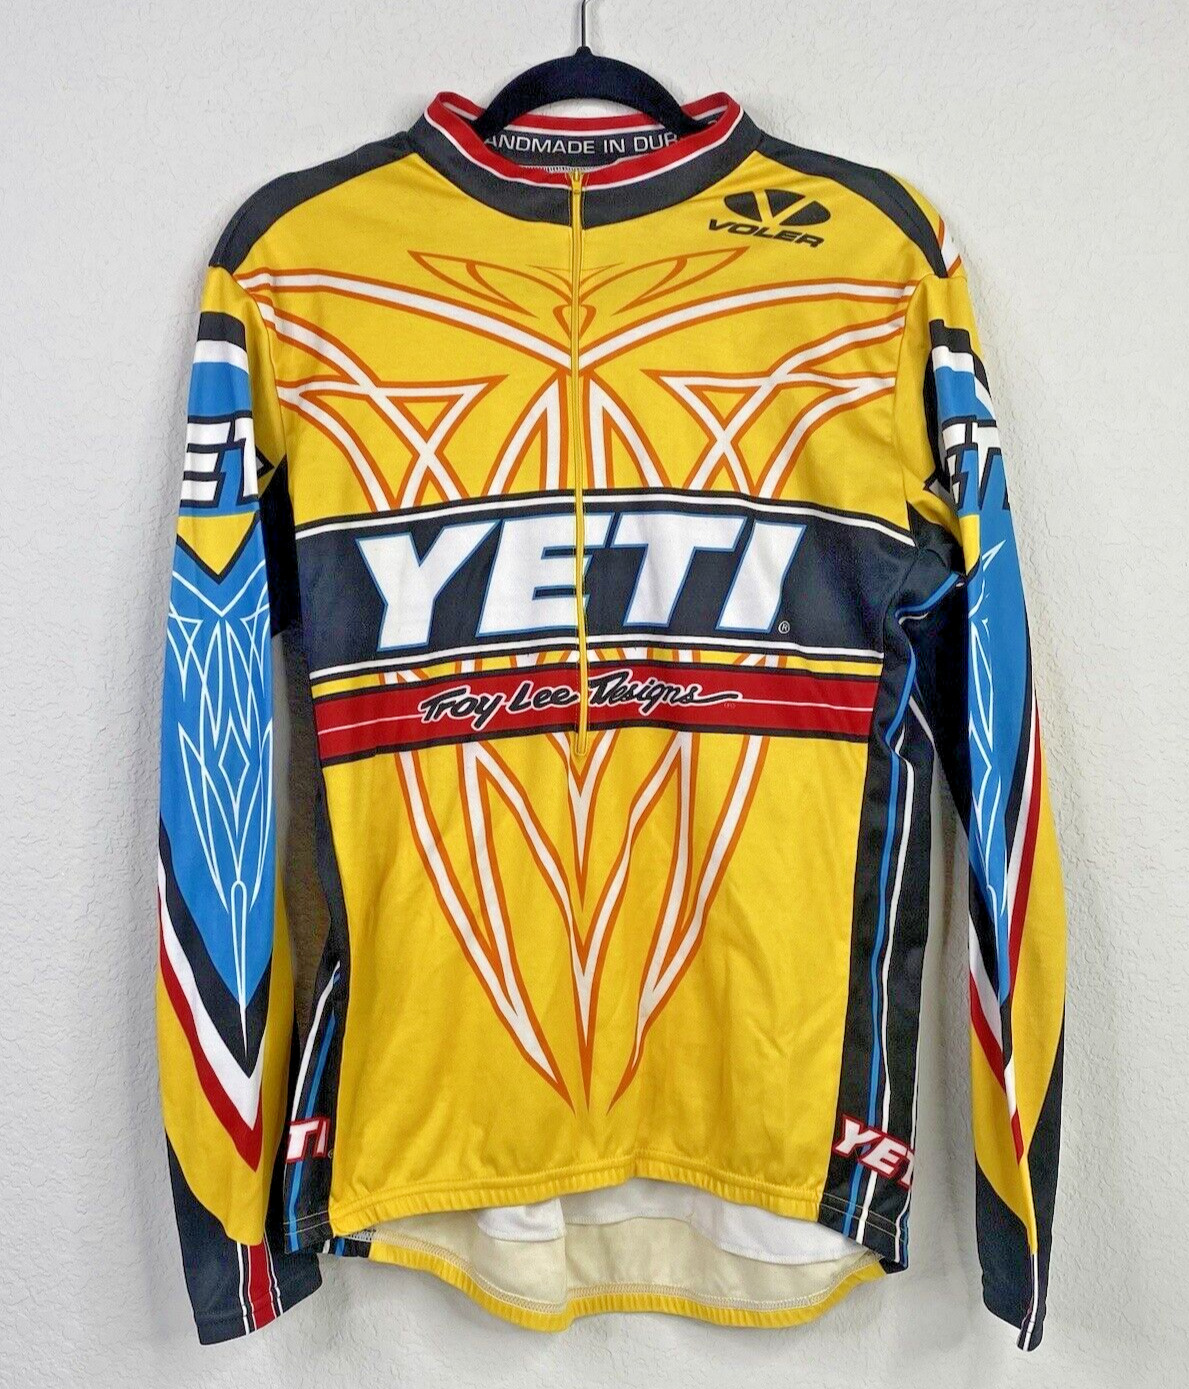 Troy Lee Designs BMX Motocross Jersey Adult Small Yellow Racing Cycling Shirt